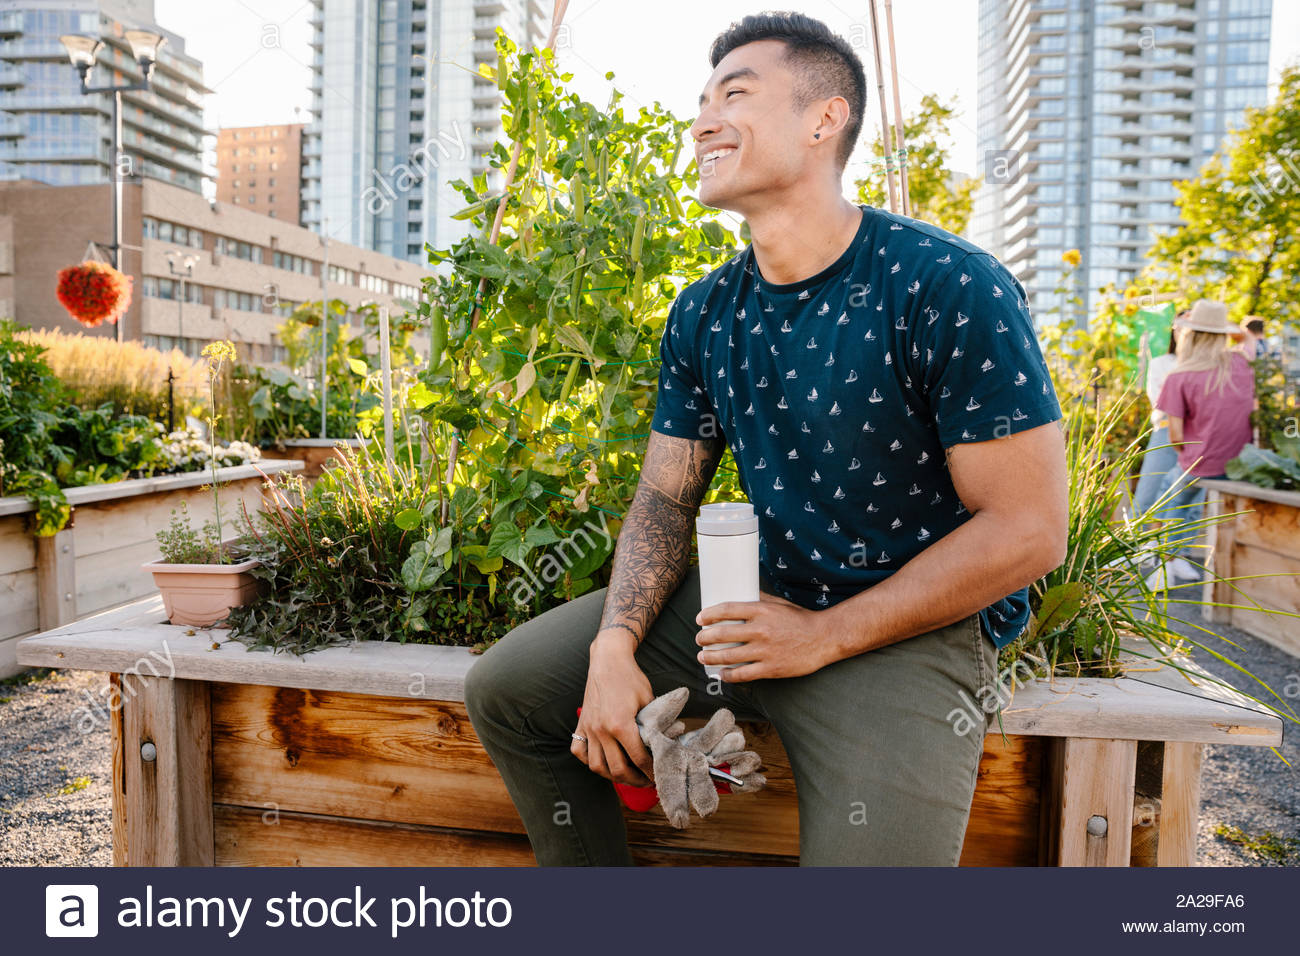 Happy young man resting, drinking water in urban community garden Stock Photo